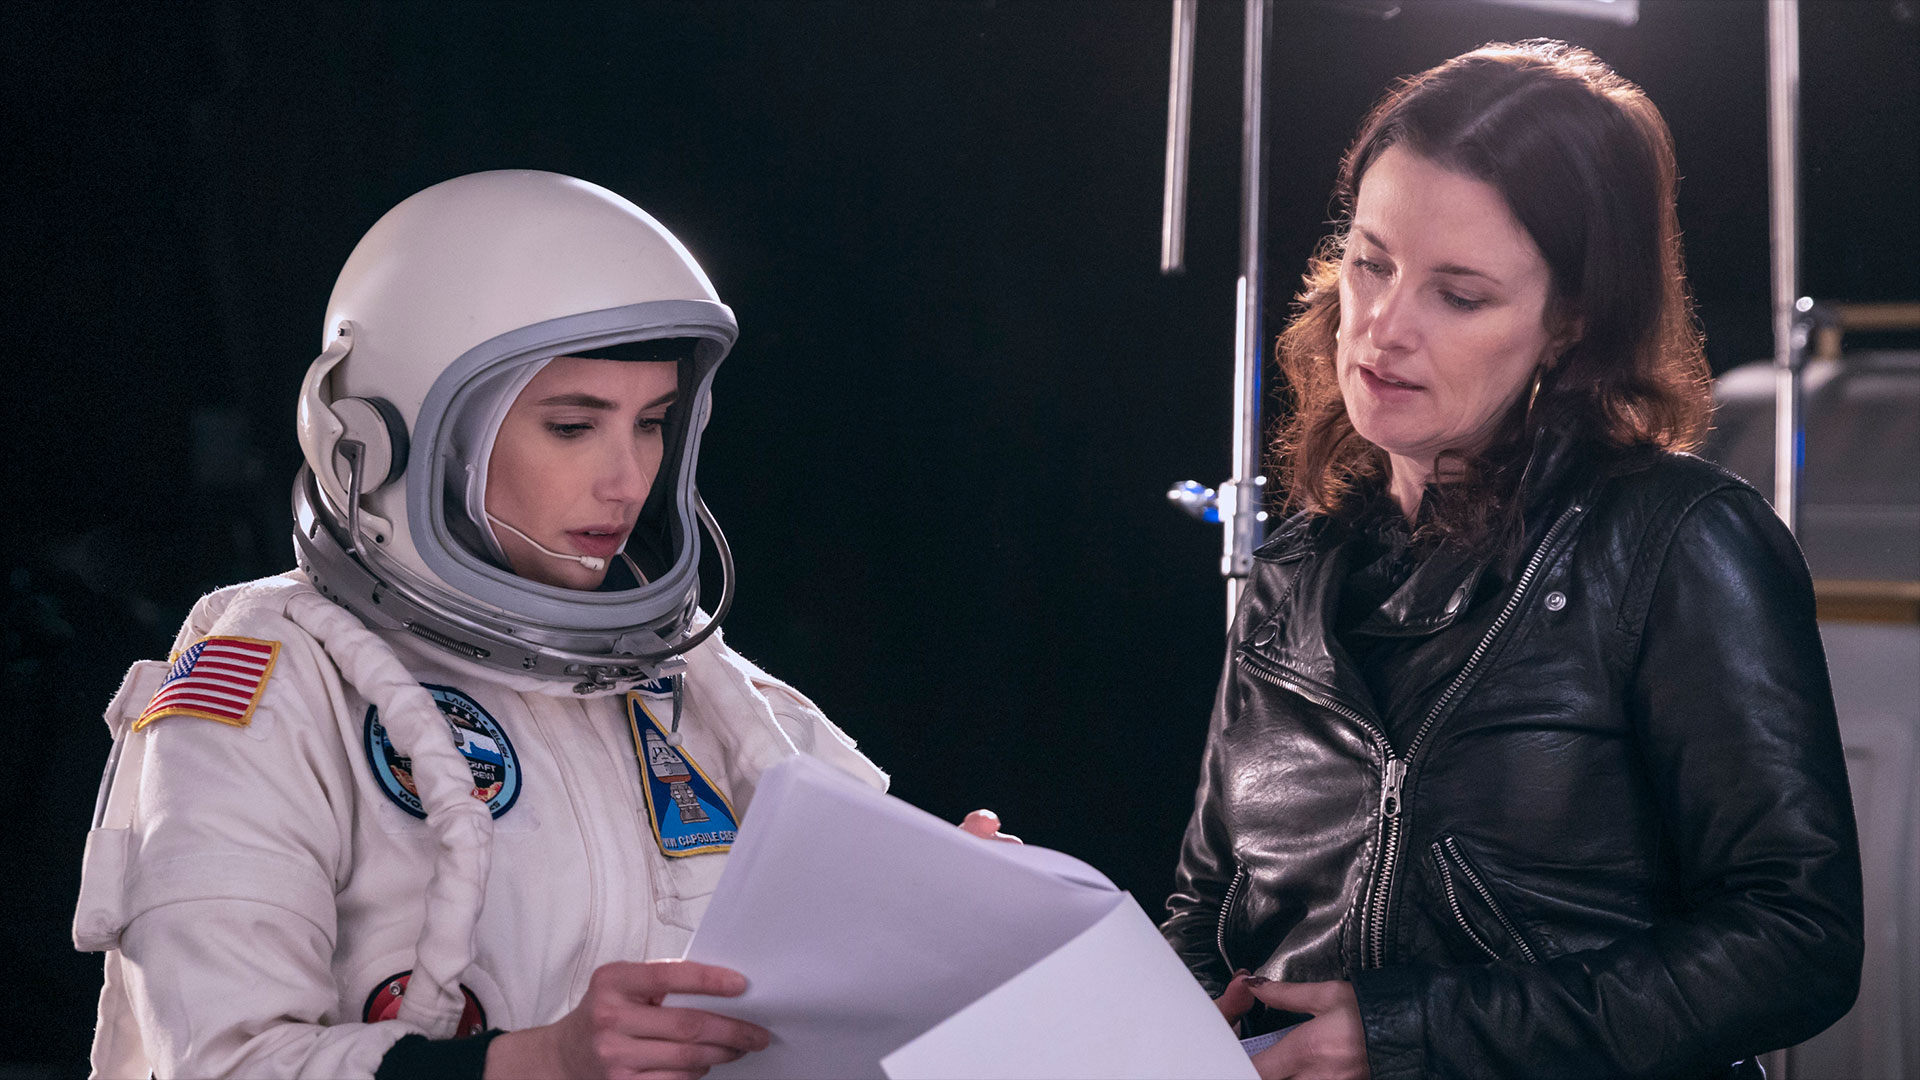  'Space Cadet' applies humor to NASA astronaut selection, says film director (interview) 